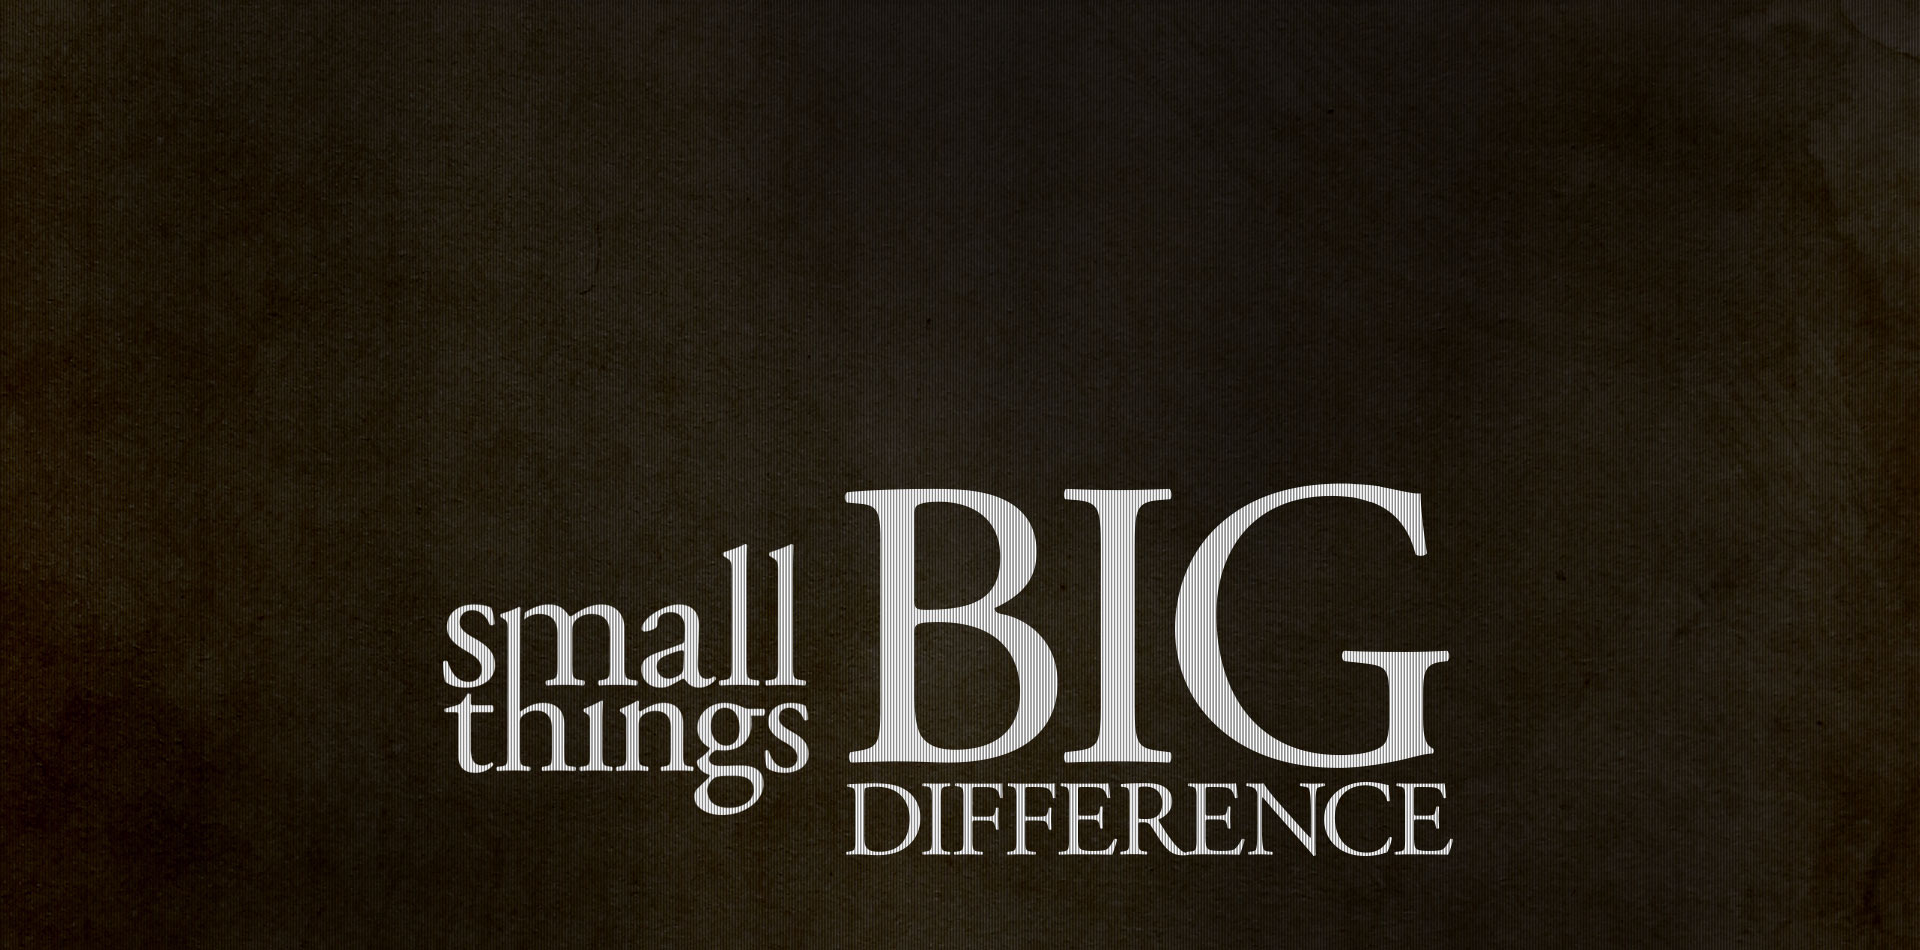 This small things. Big difference. Difference things. Stuff and things. Small things.